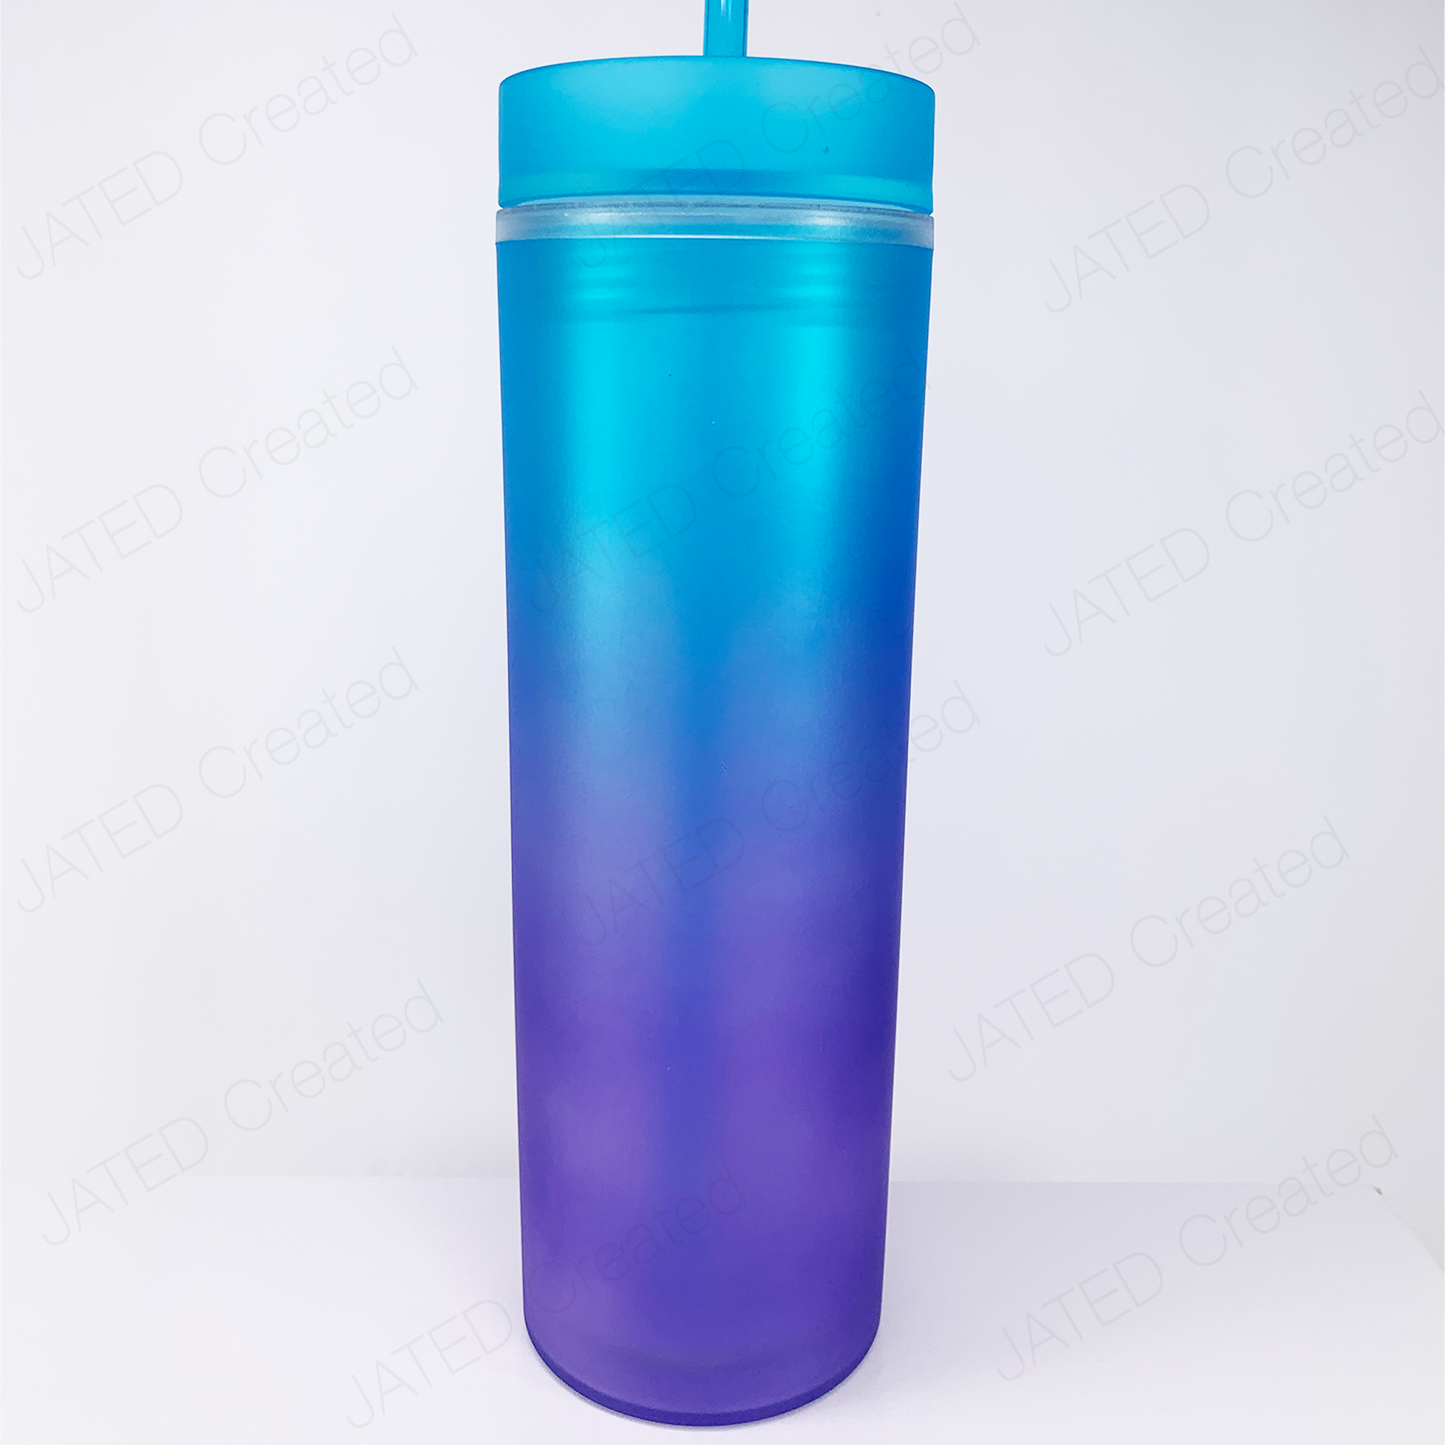 16 oz Blue Frosted Acrylic Tumblers